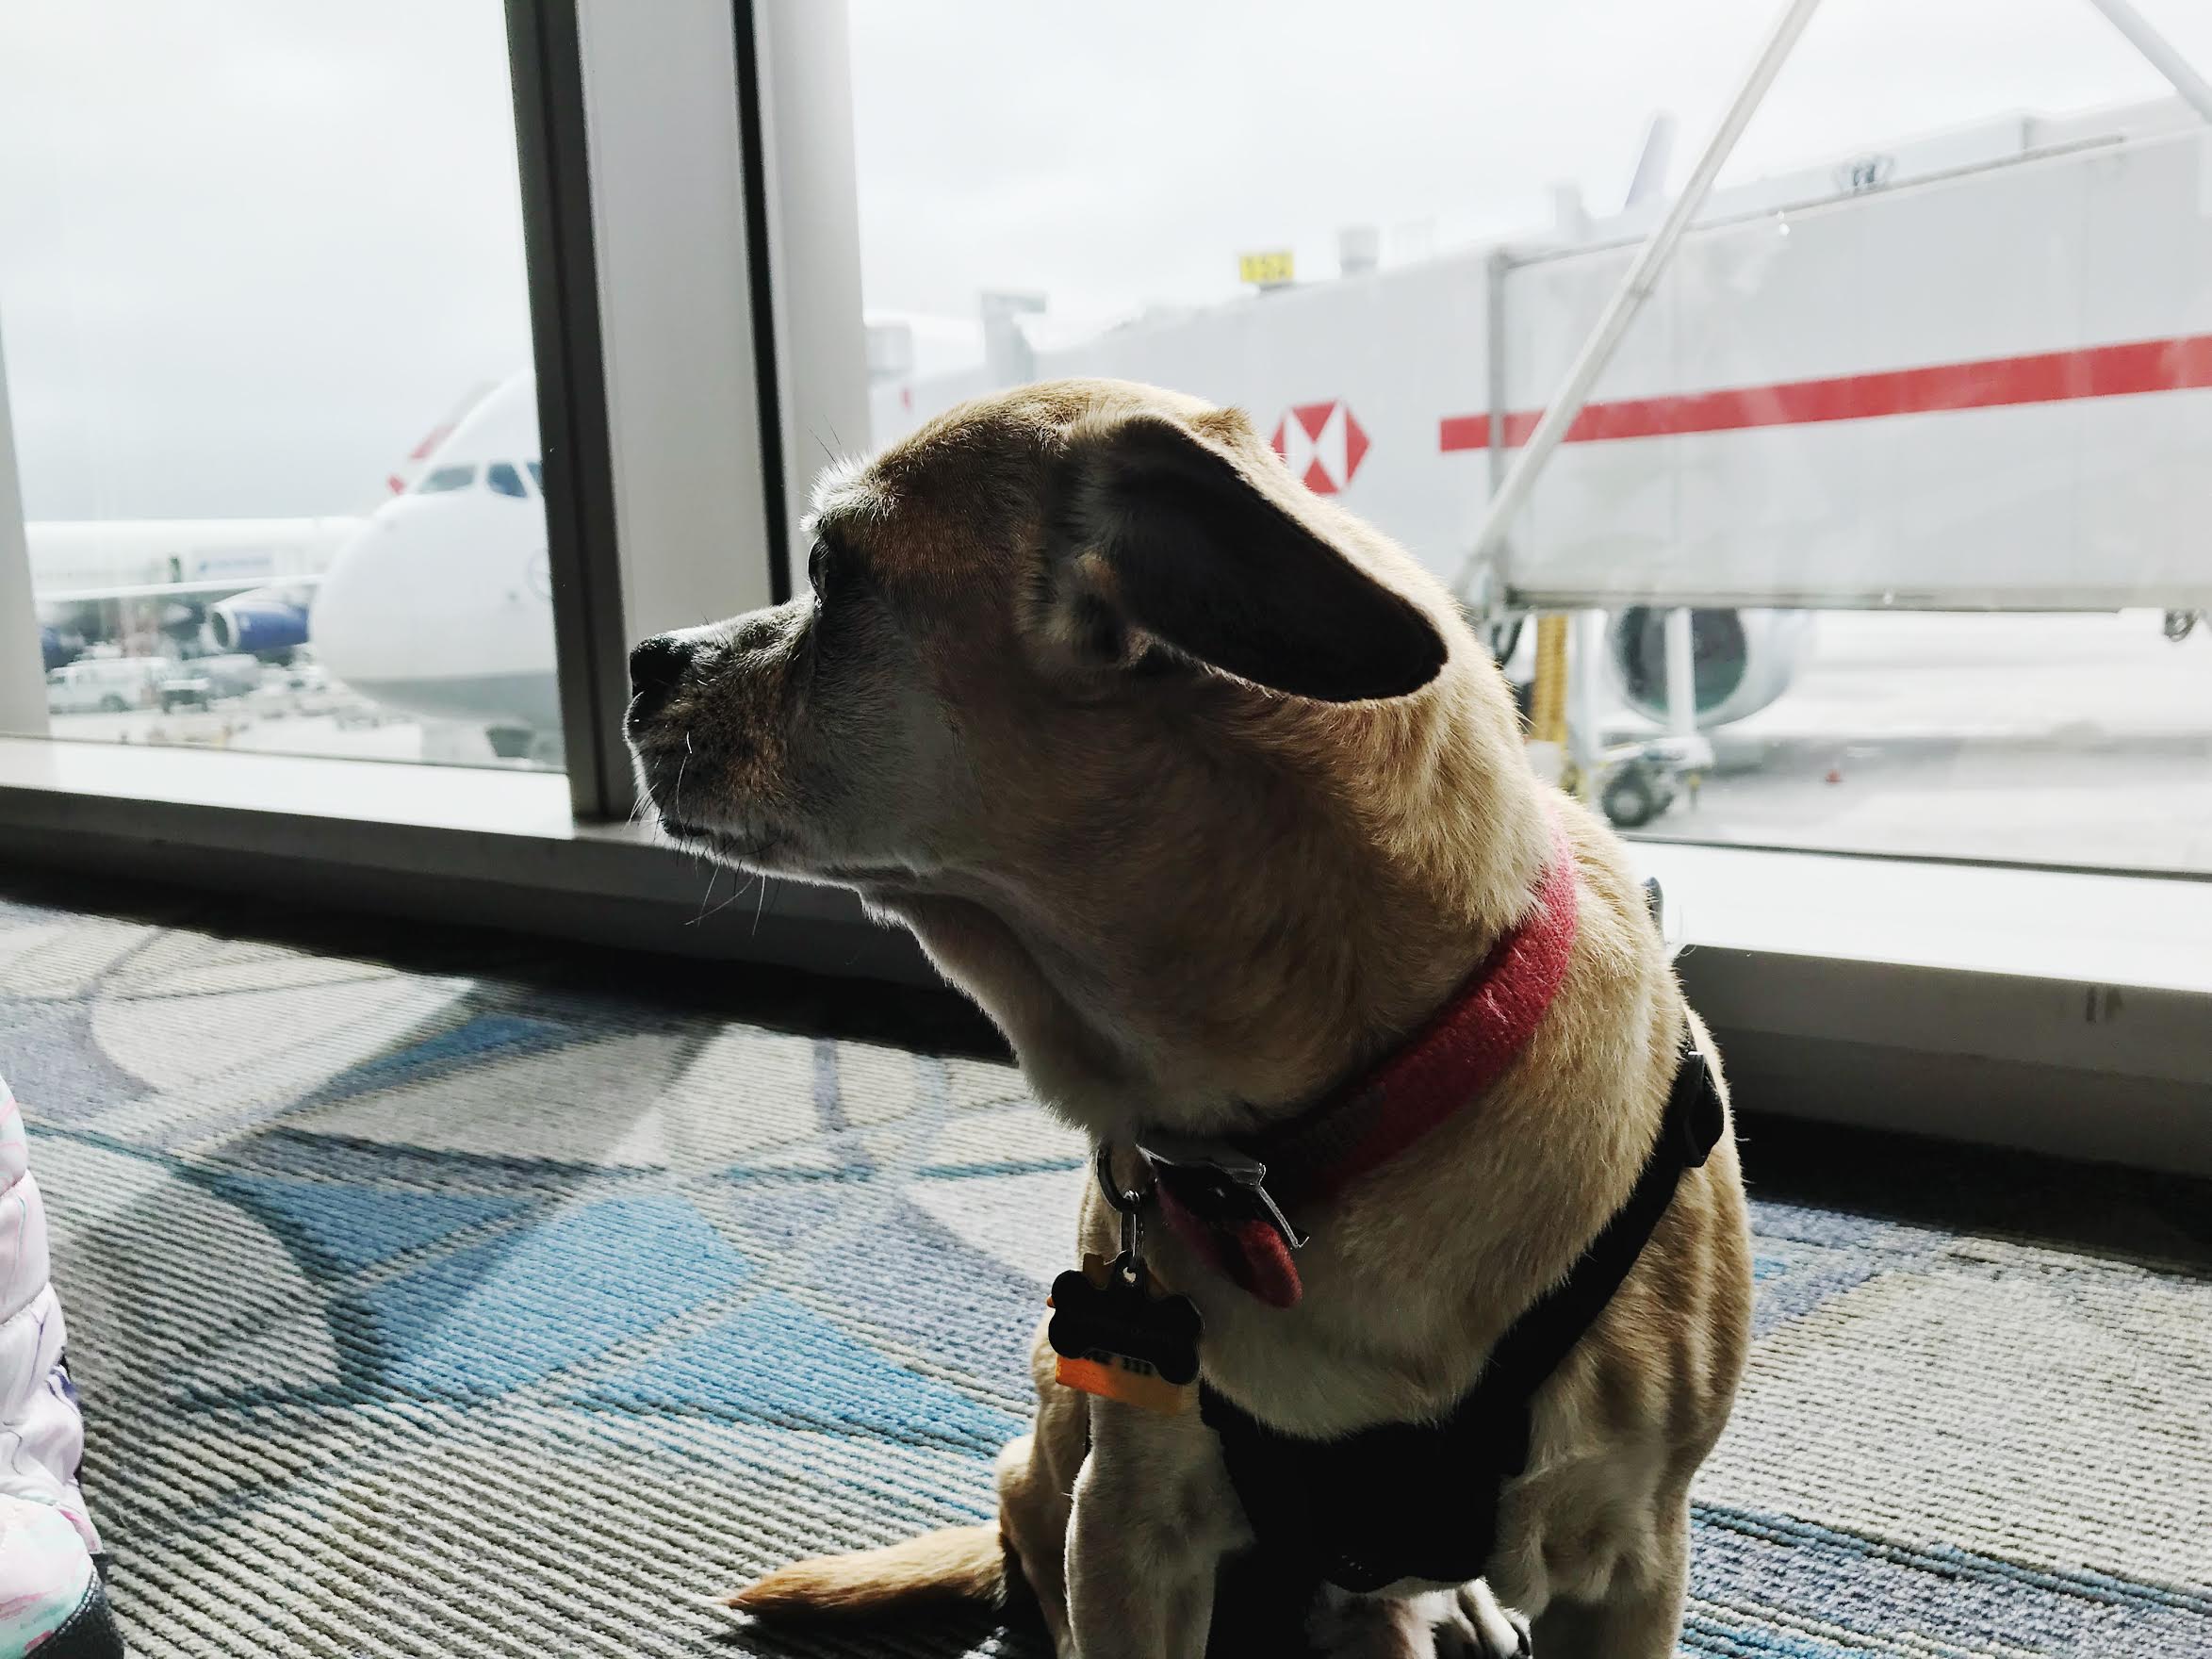 I traveled internationally with my dog for the first time